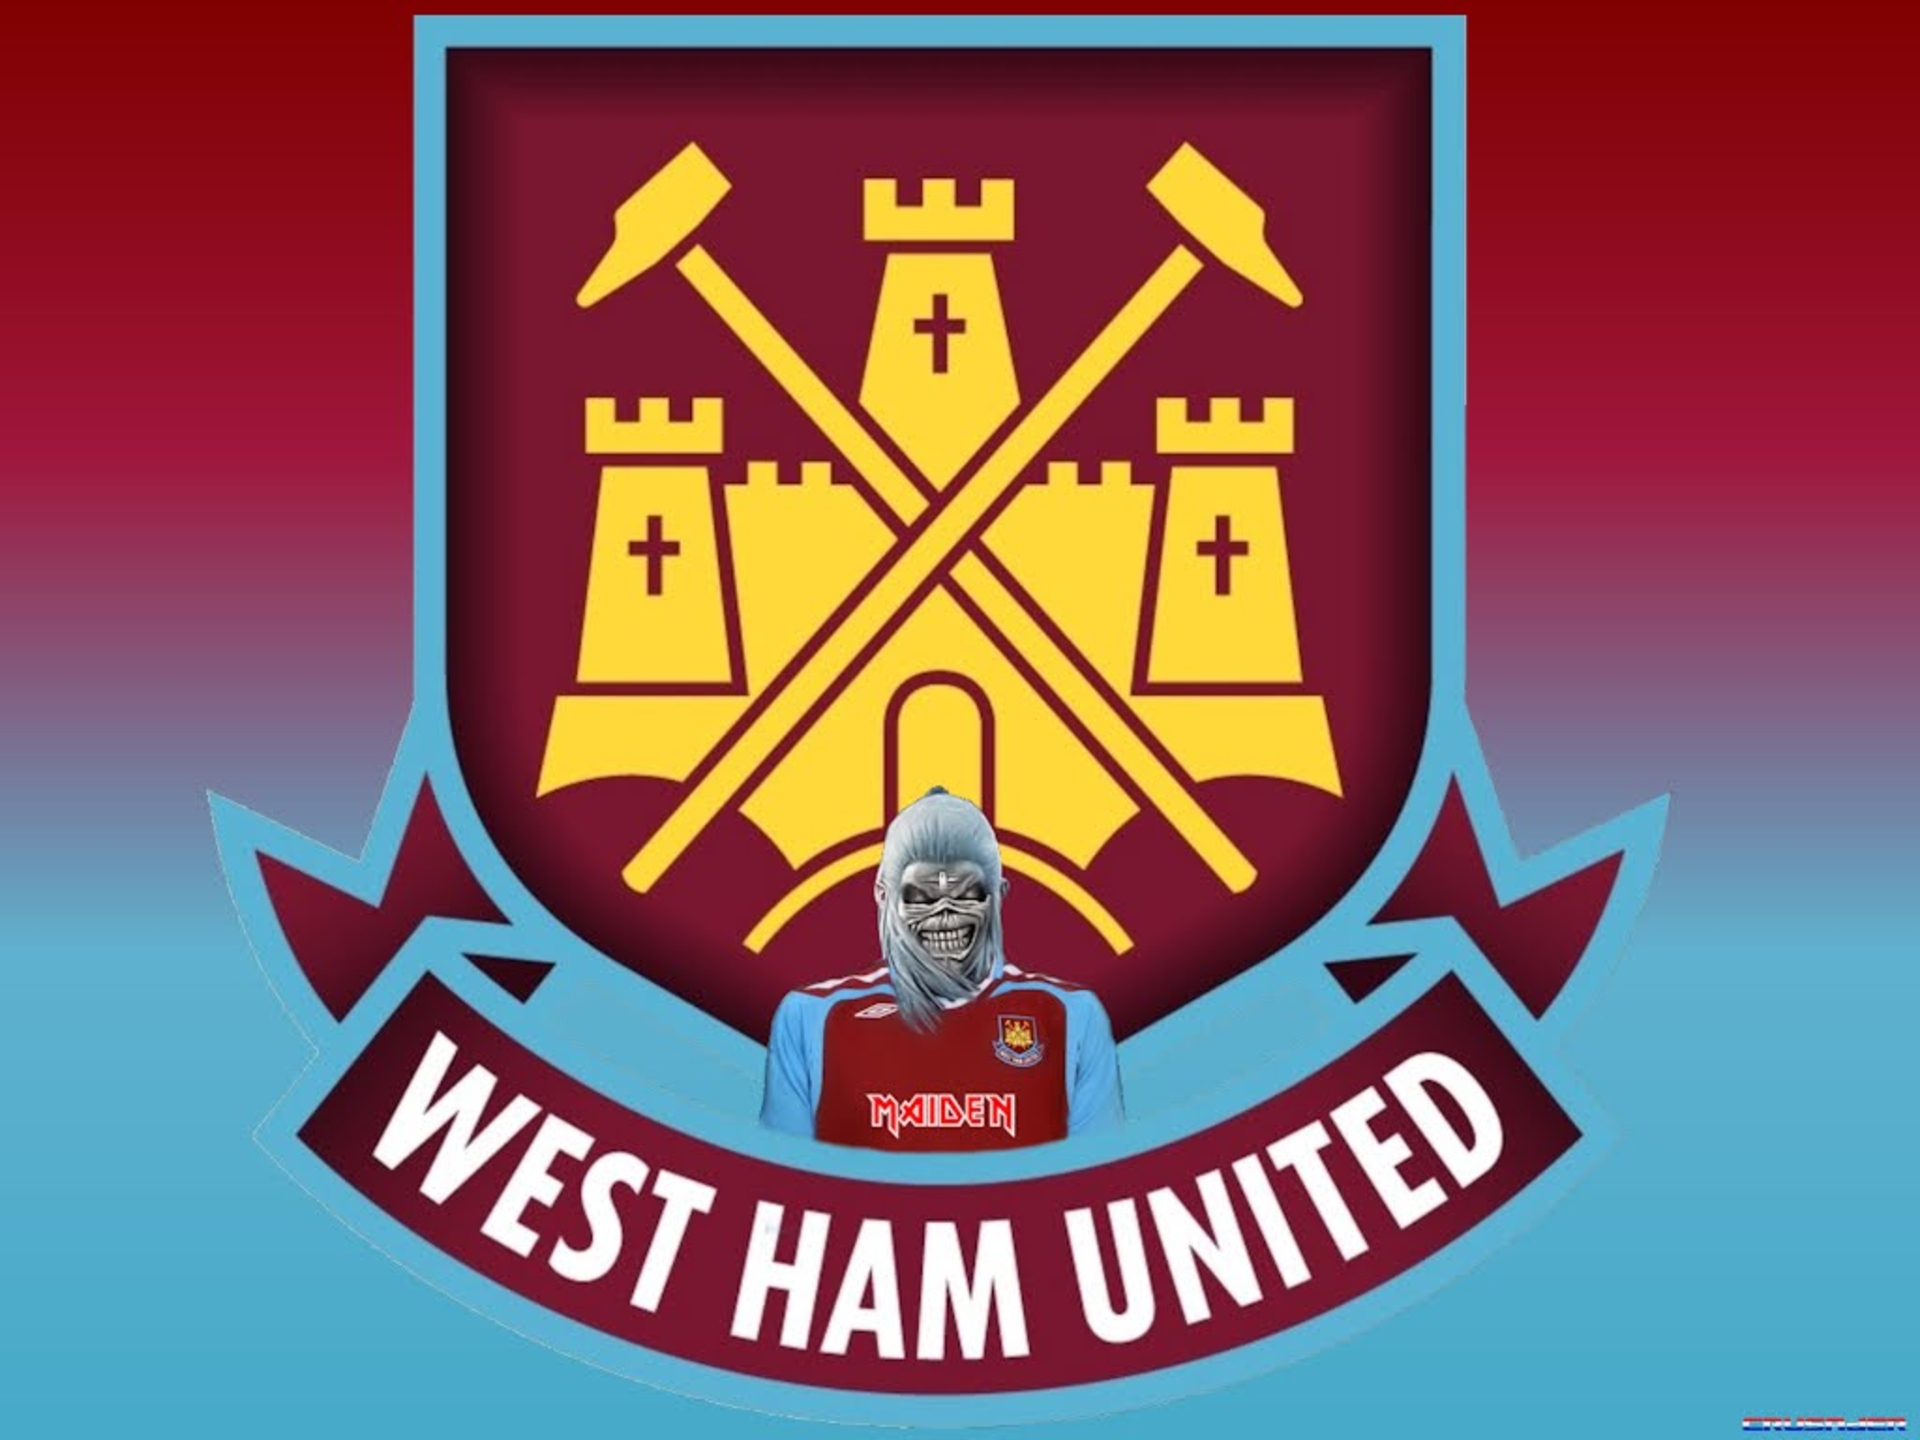 Beloved West Ham United Wallpaper And Image Pictures